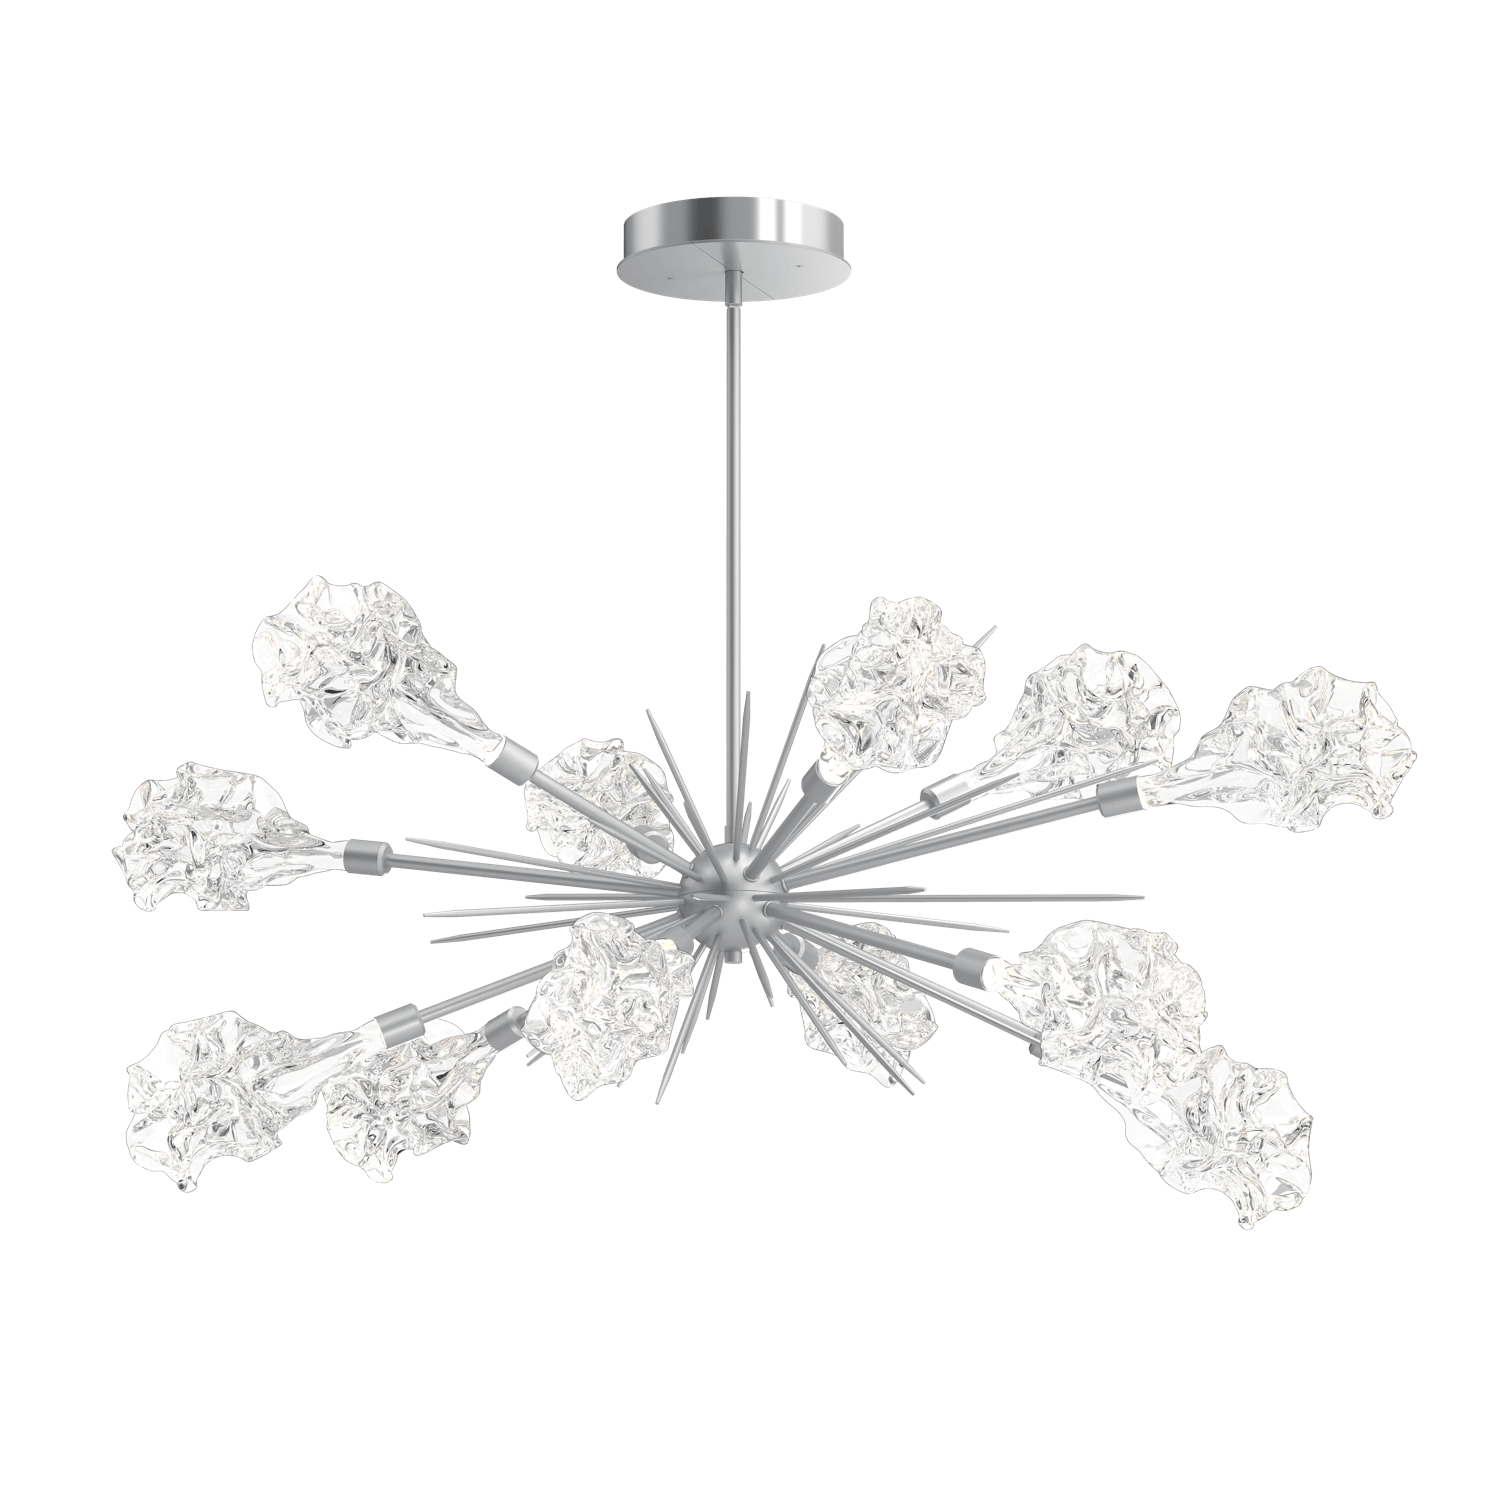 PLB0059-0A-CS-Hammerton-Studio-Blossom-47-inch-oval-starburst-chandelier-with-classic-silver-finish-and-clear-handblown-crystal-glass-shades-and-LED-lamping